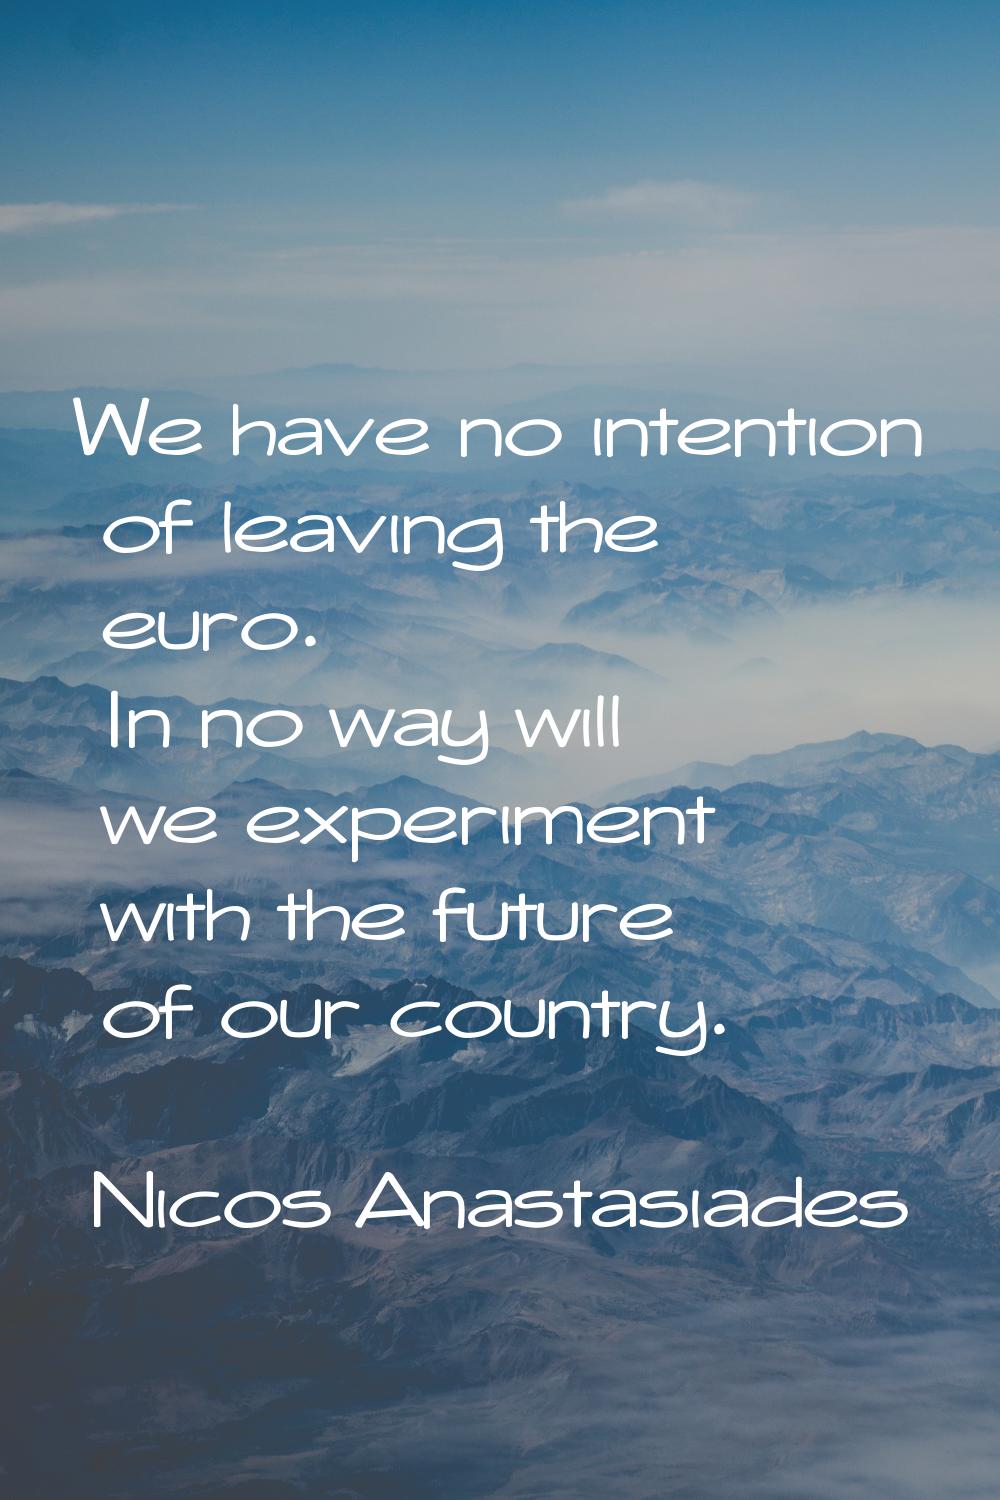 We have no intention of leaving the euro. In no way will we experiment with the future of our count